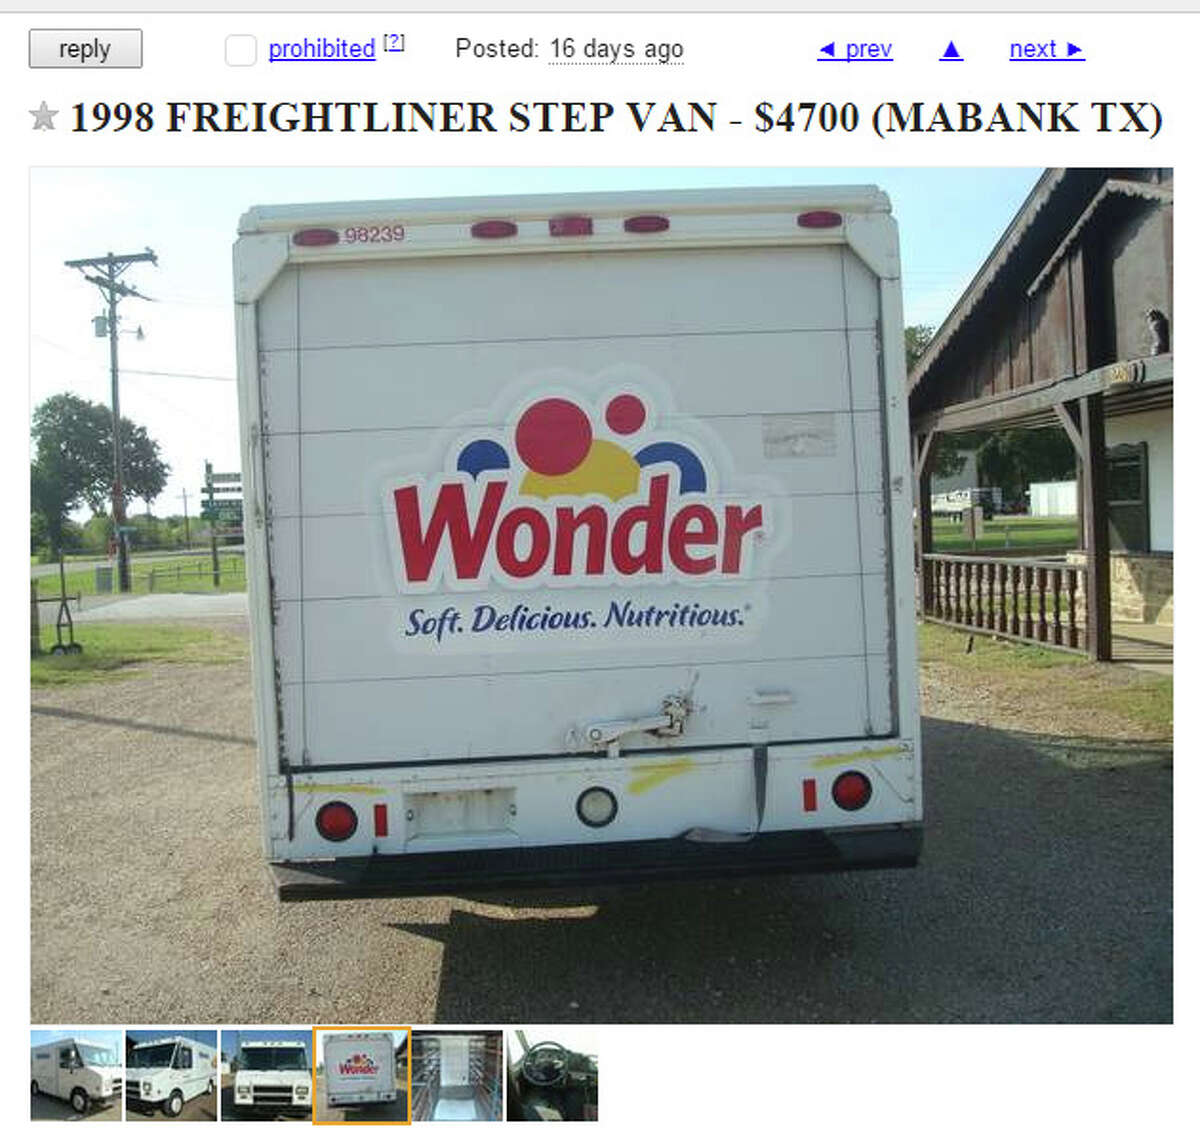 Here are some of the most wonderfully bizarre things you can find on Craigslist.